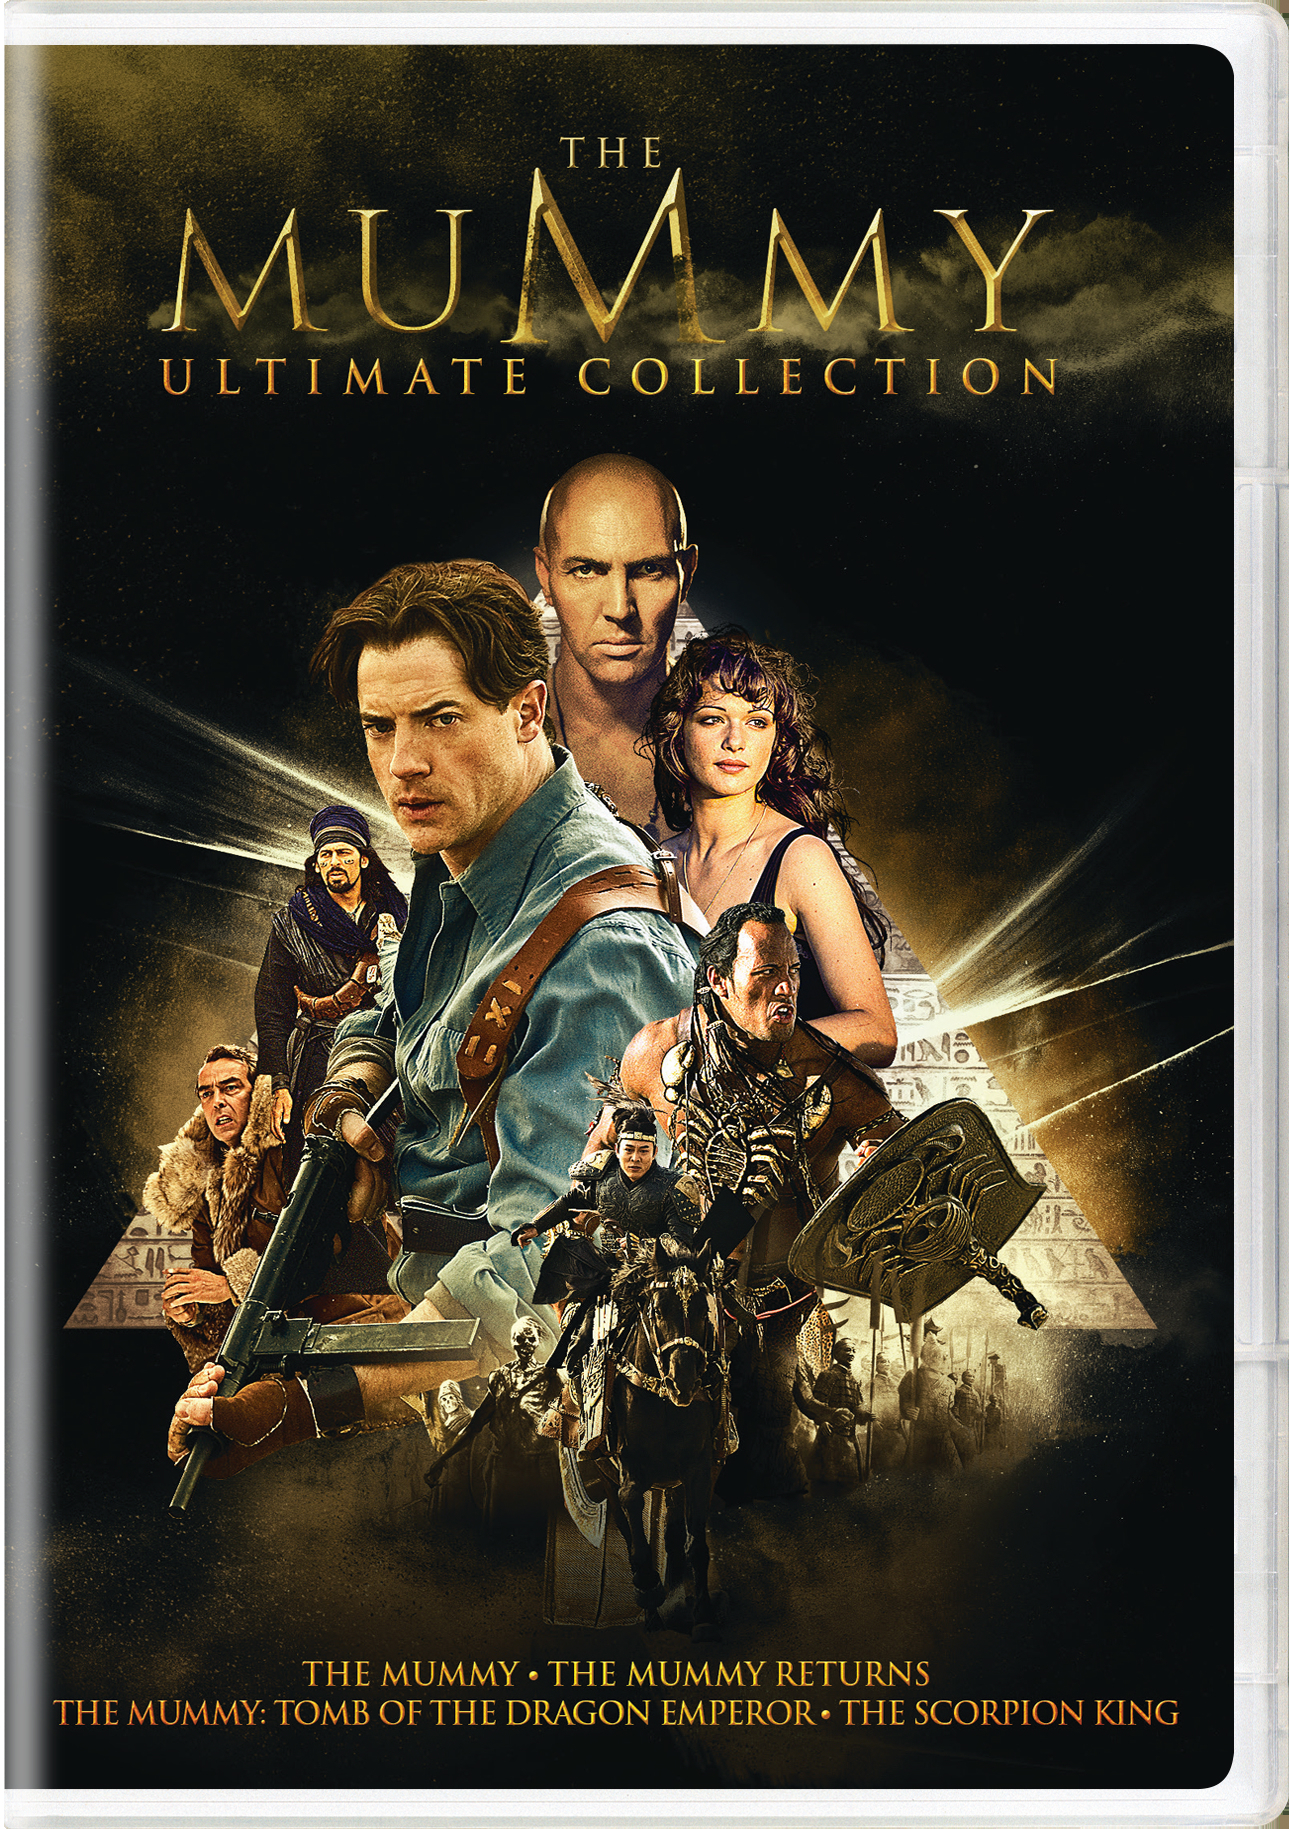 The Mummy Ultimate Collection (Box Set) - DVD   - Action Movies On DVD - Movies On GRUV